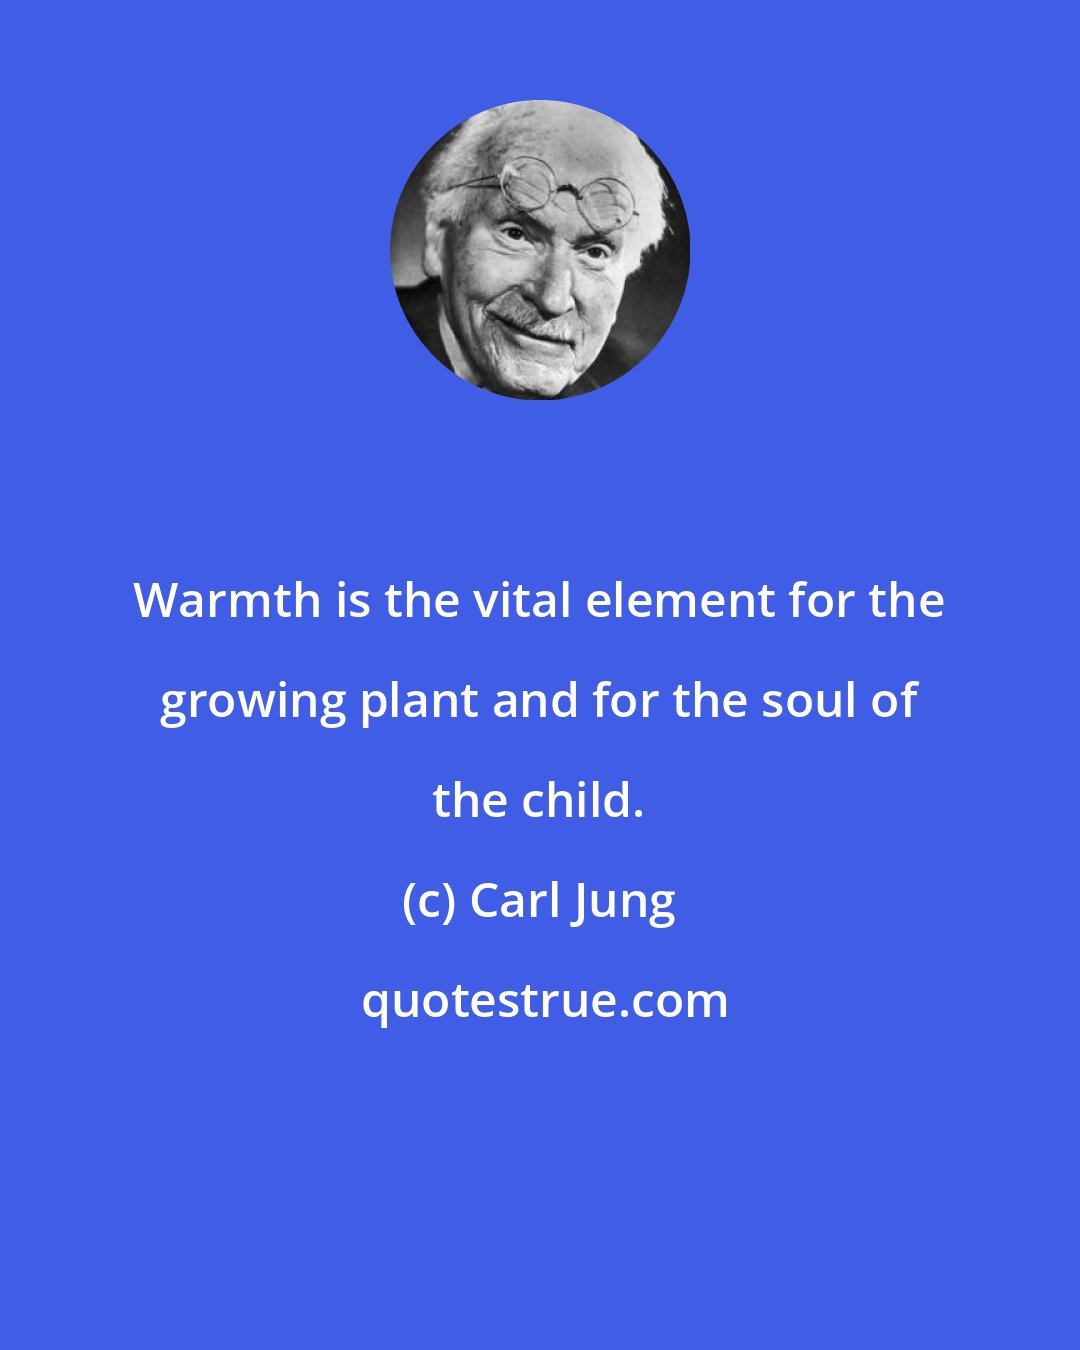 Carl Jung: Warmth is the vital element for the growing plant and for the soul of the child.